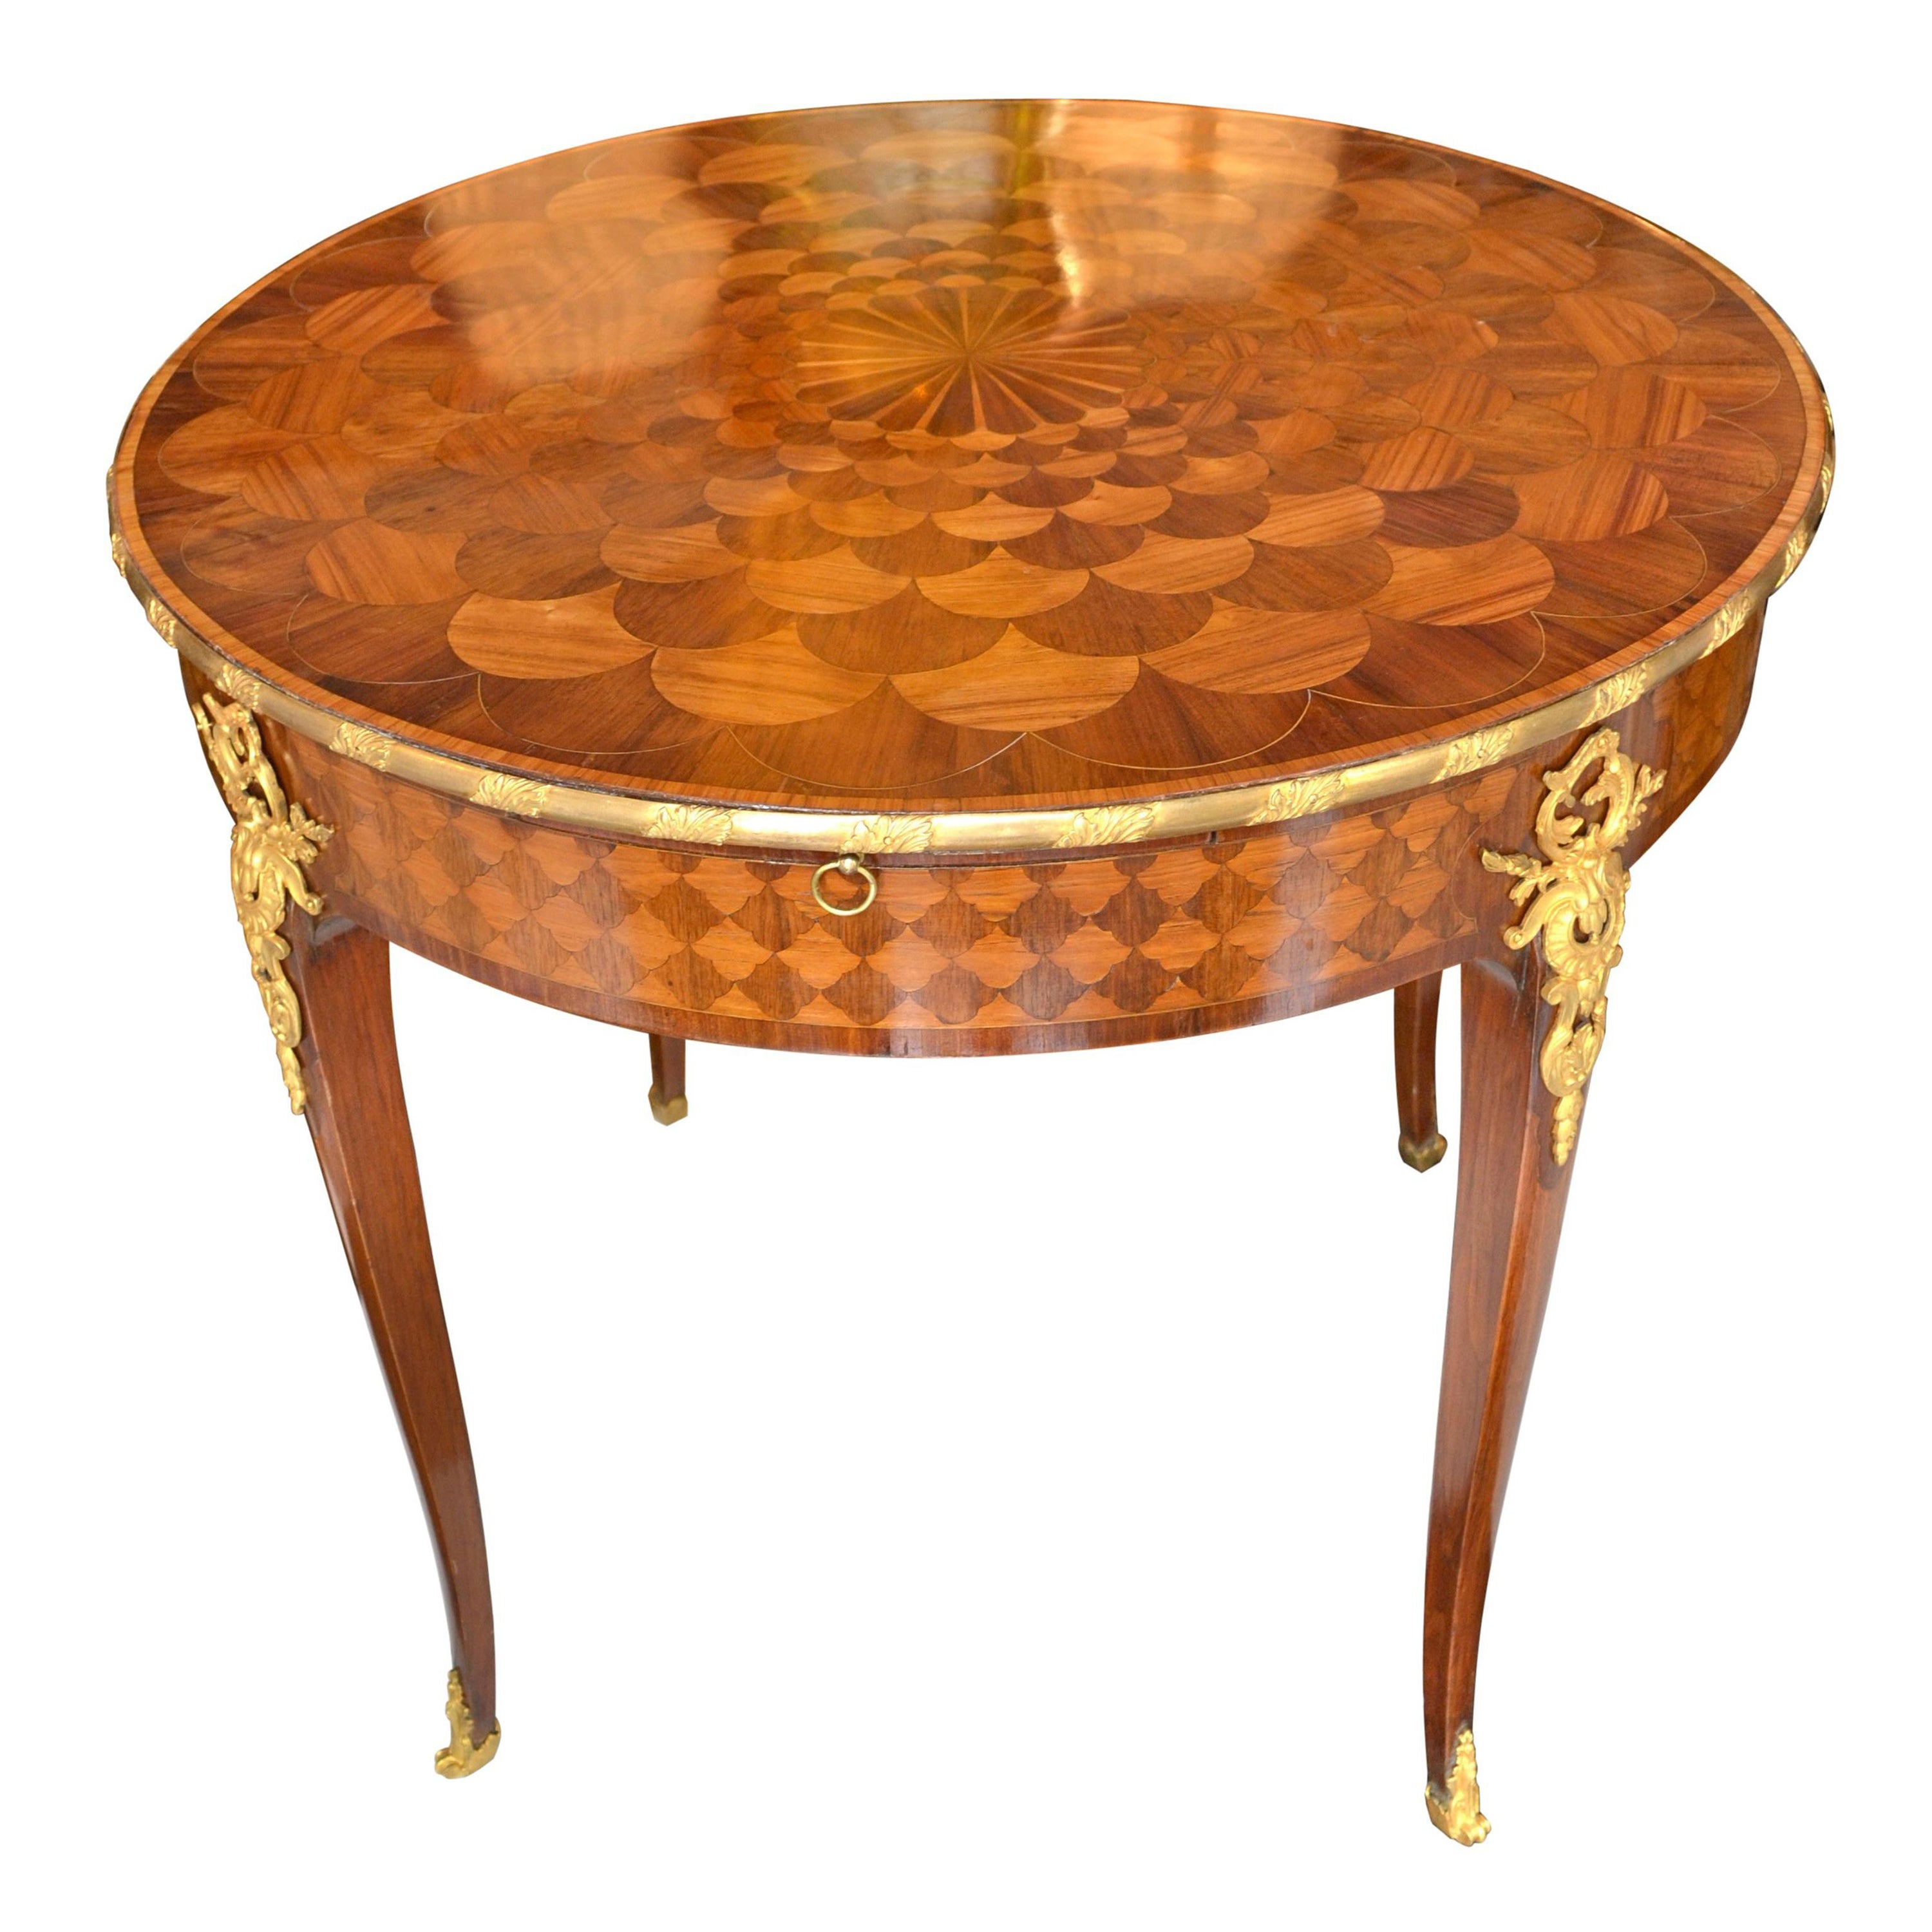 French, Marquetry and Gilt Bronze Round Centre Table Attributed to Linke